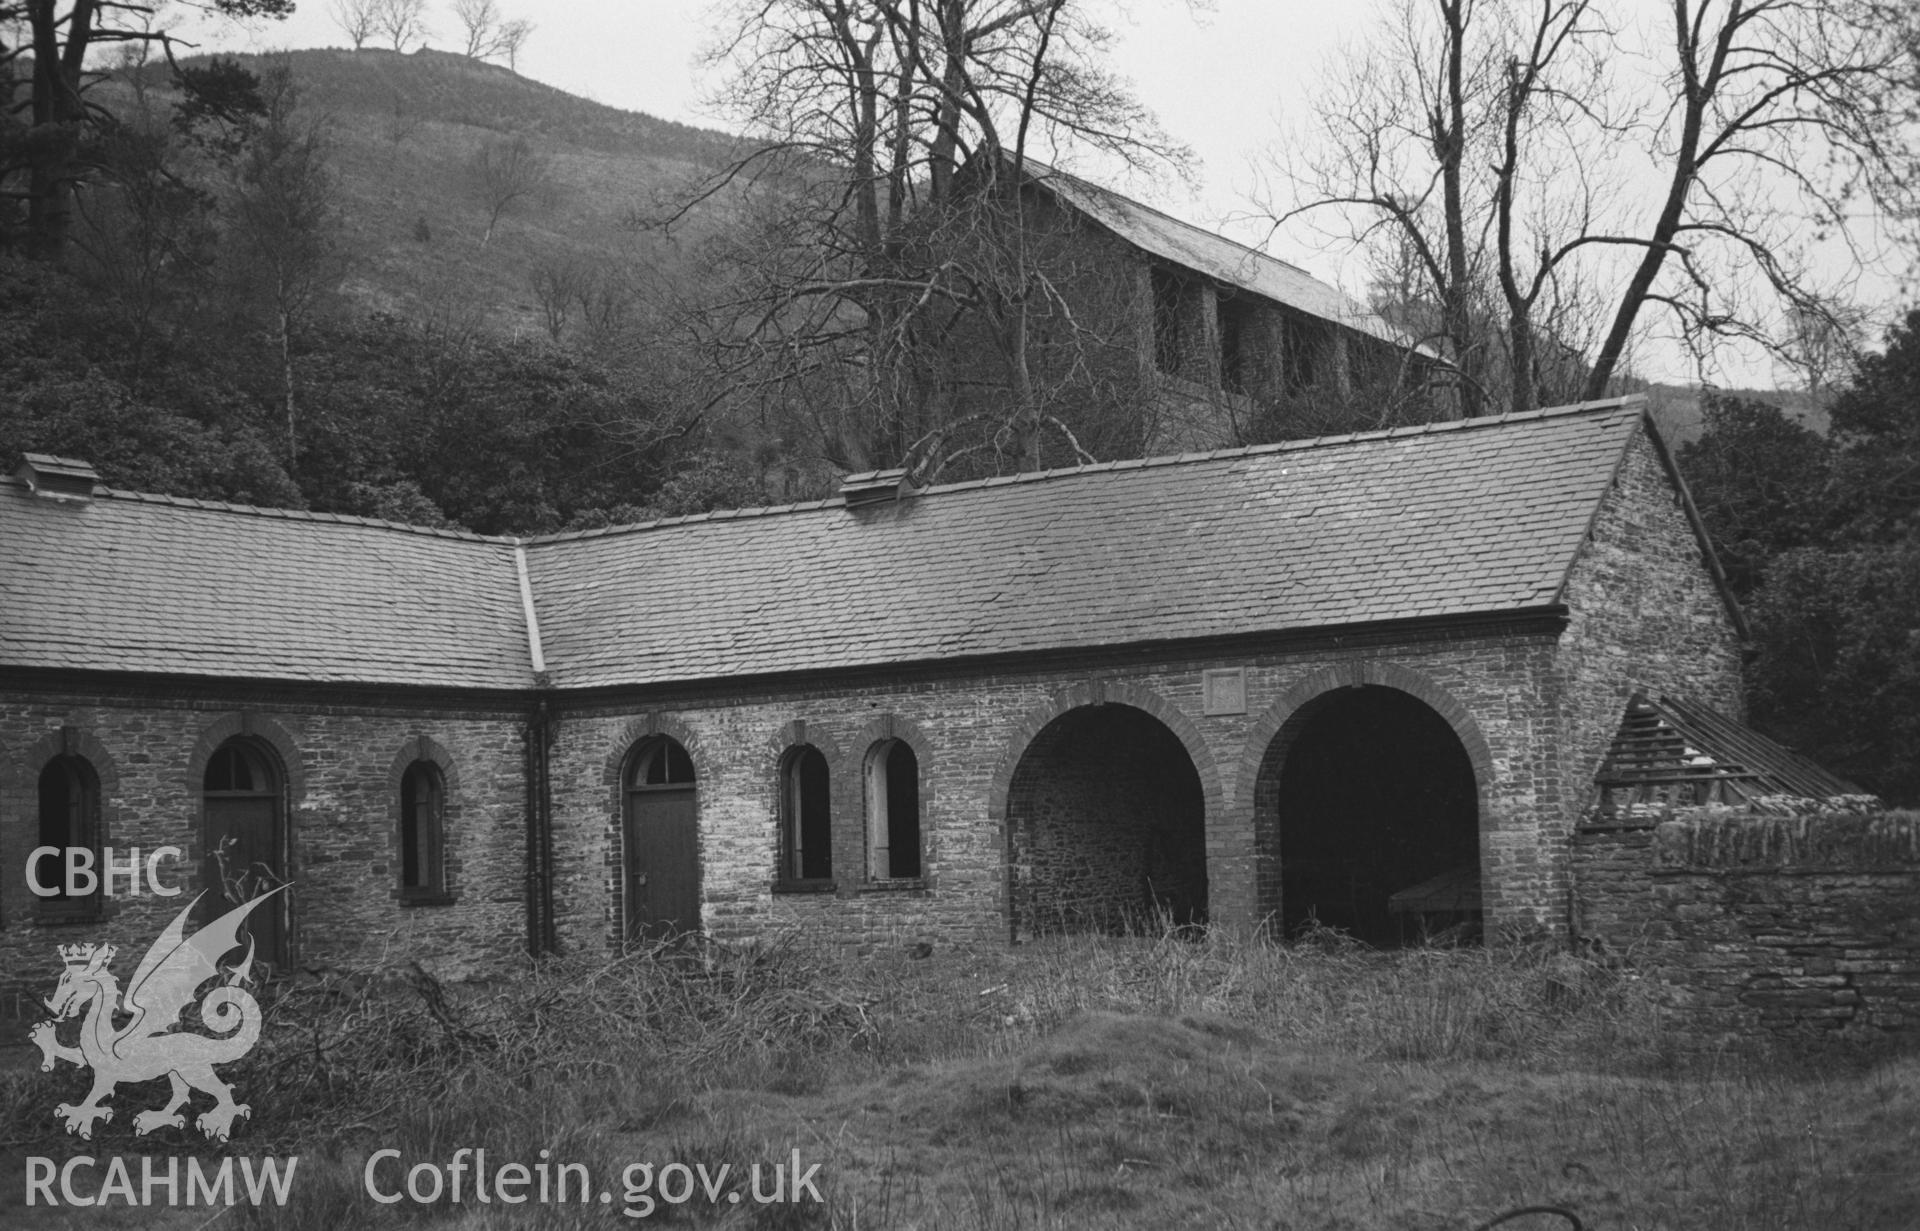 Black and White photograph showing Hafod Uchtryd stable buildings. Photographed by Arthur Chater in March 1961 from Grid Reference SN 759 733, looking north-east.